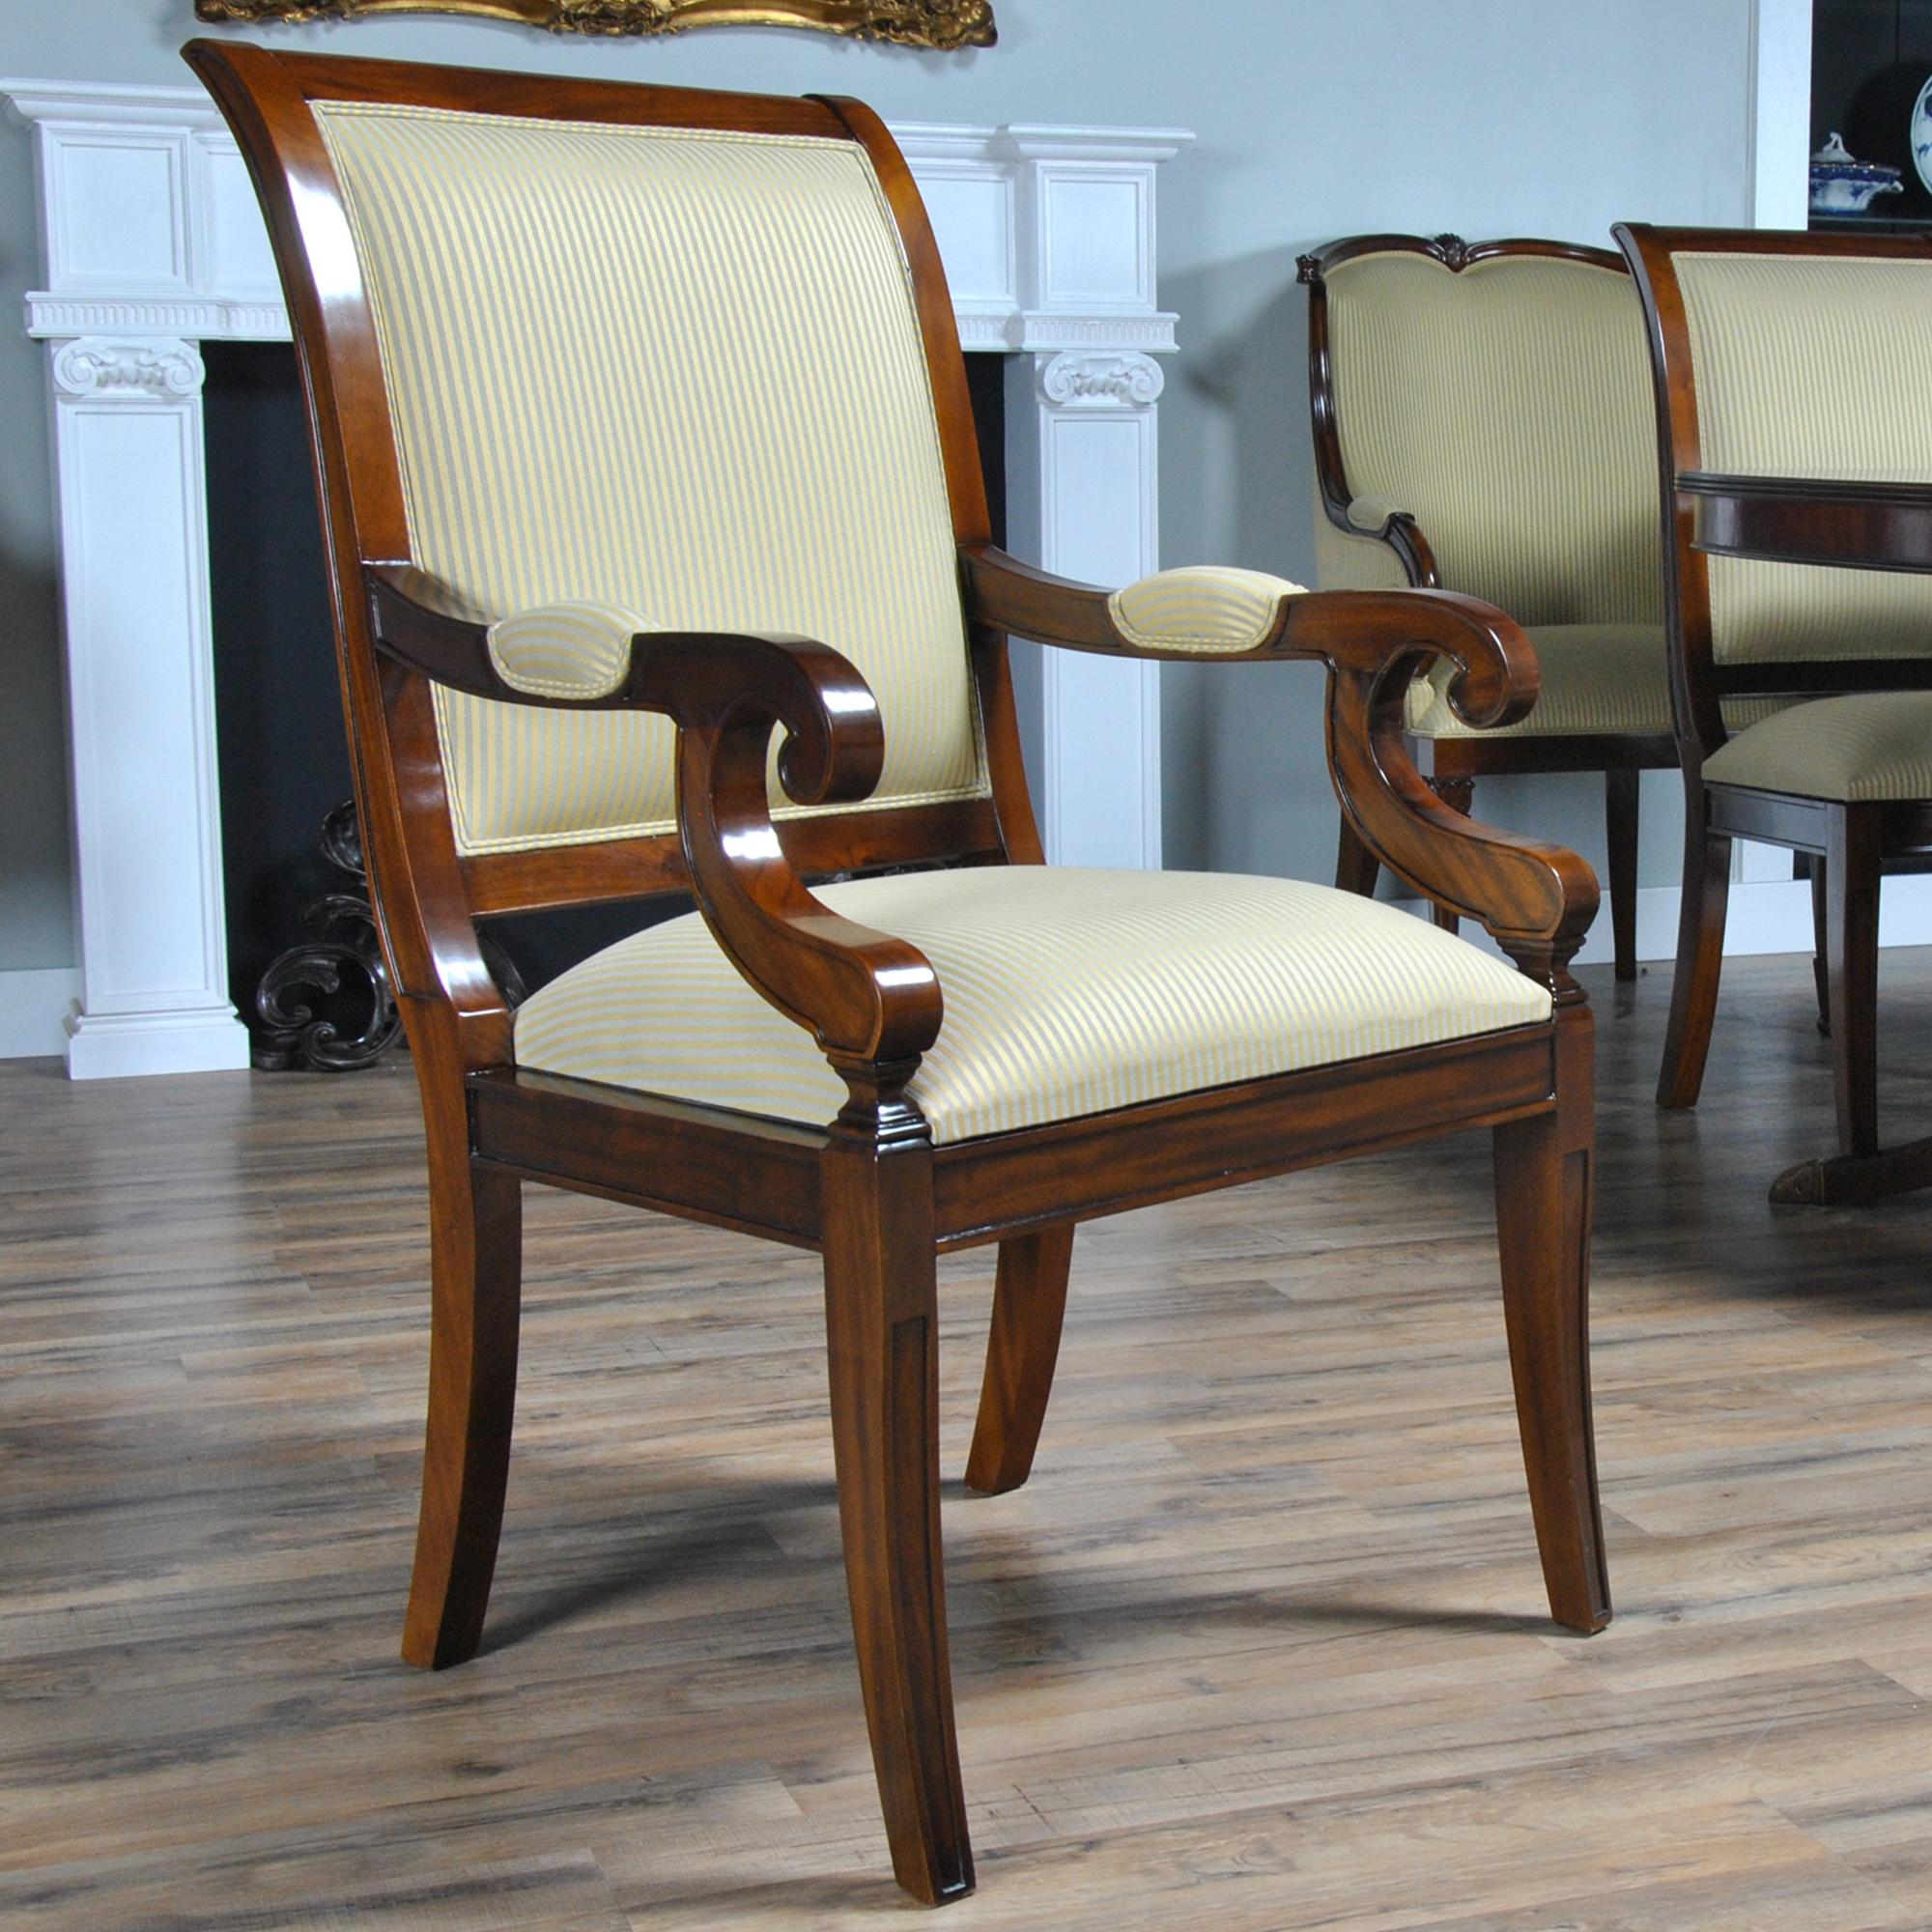 This set of 10 Regency Upholstered Dining Chairs, comprising of 2 arm chairs and 8 side chairs. It has long been one of well as our most popular sets of upholstered back chairs. These are a great quality, solid mahogany, hand made set of ten chairs